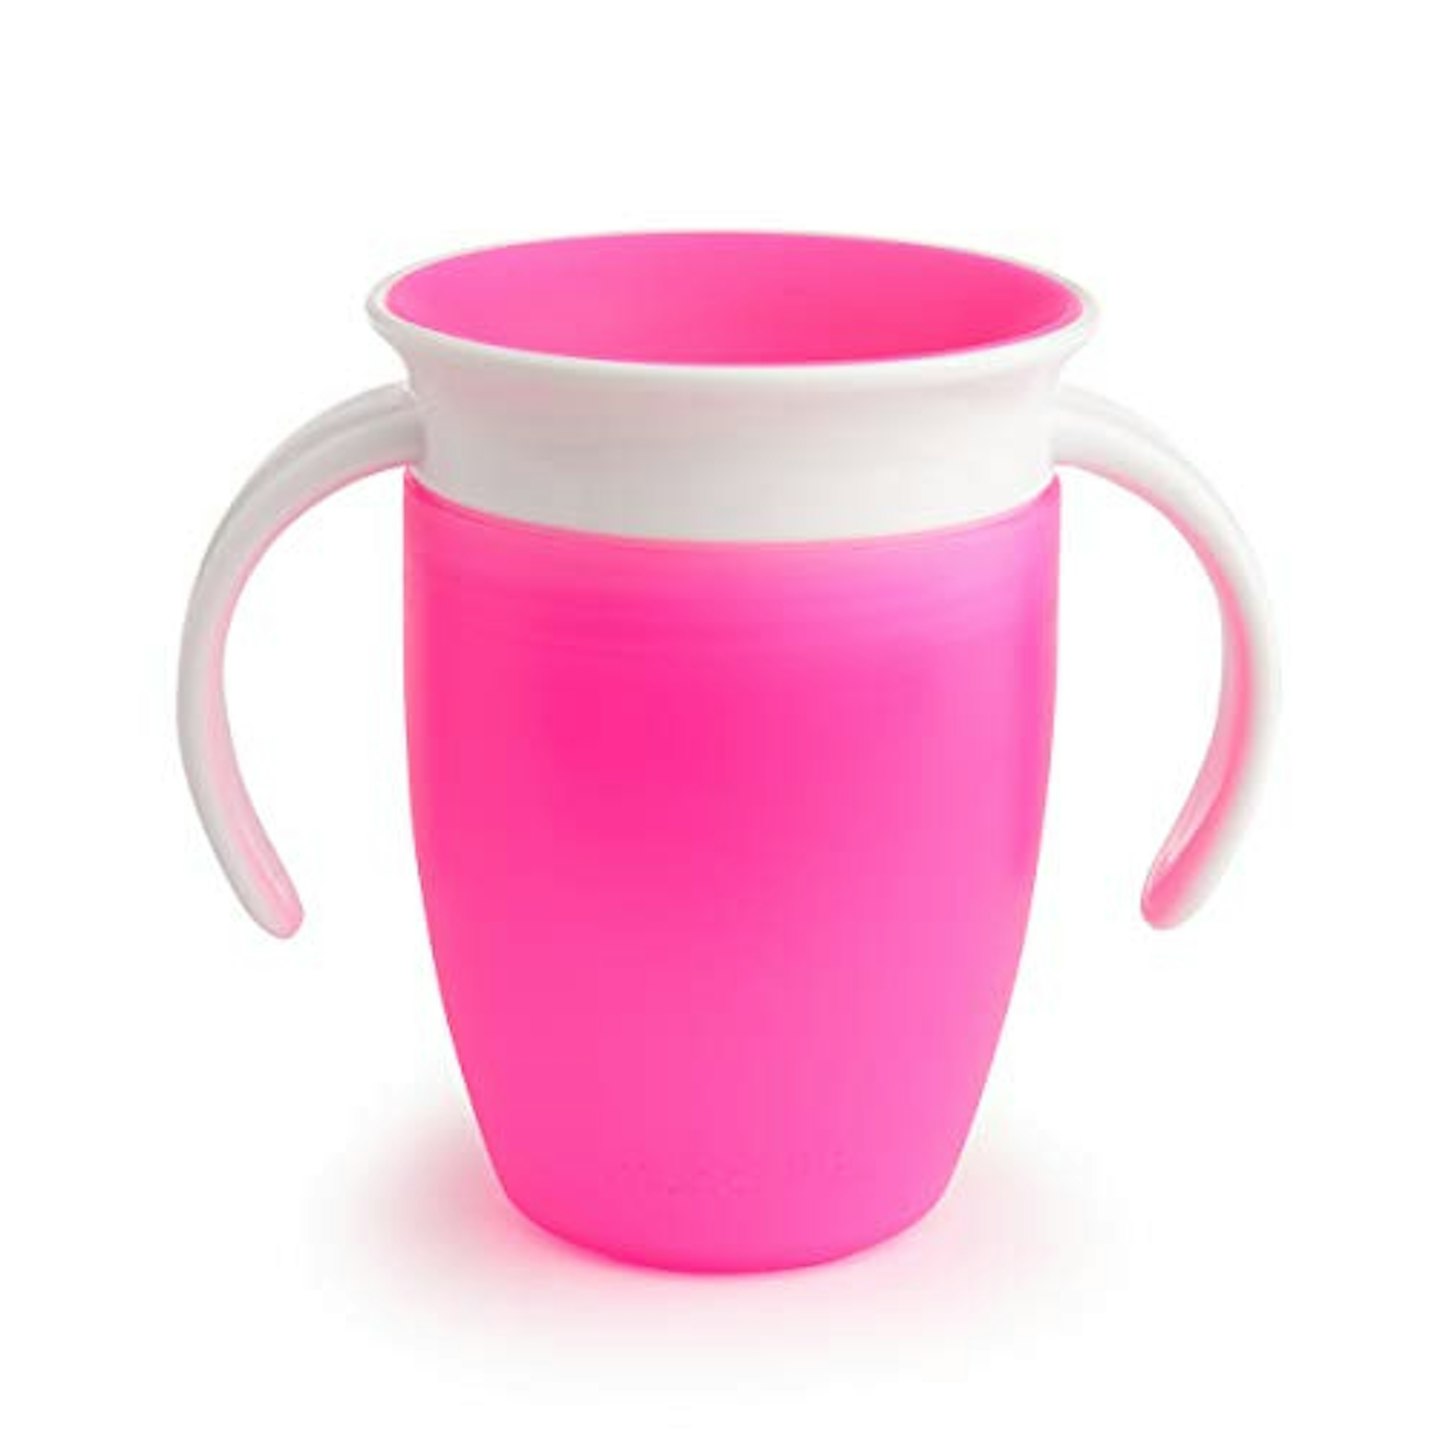 The best all-round sippy cup: Munchkin Miracle 360 Degree Trainer Cup